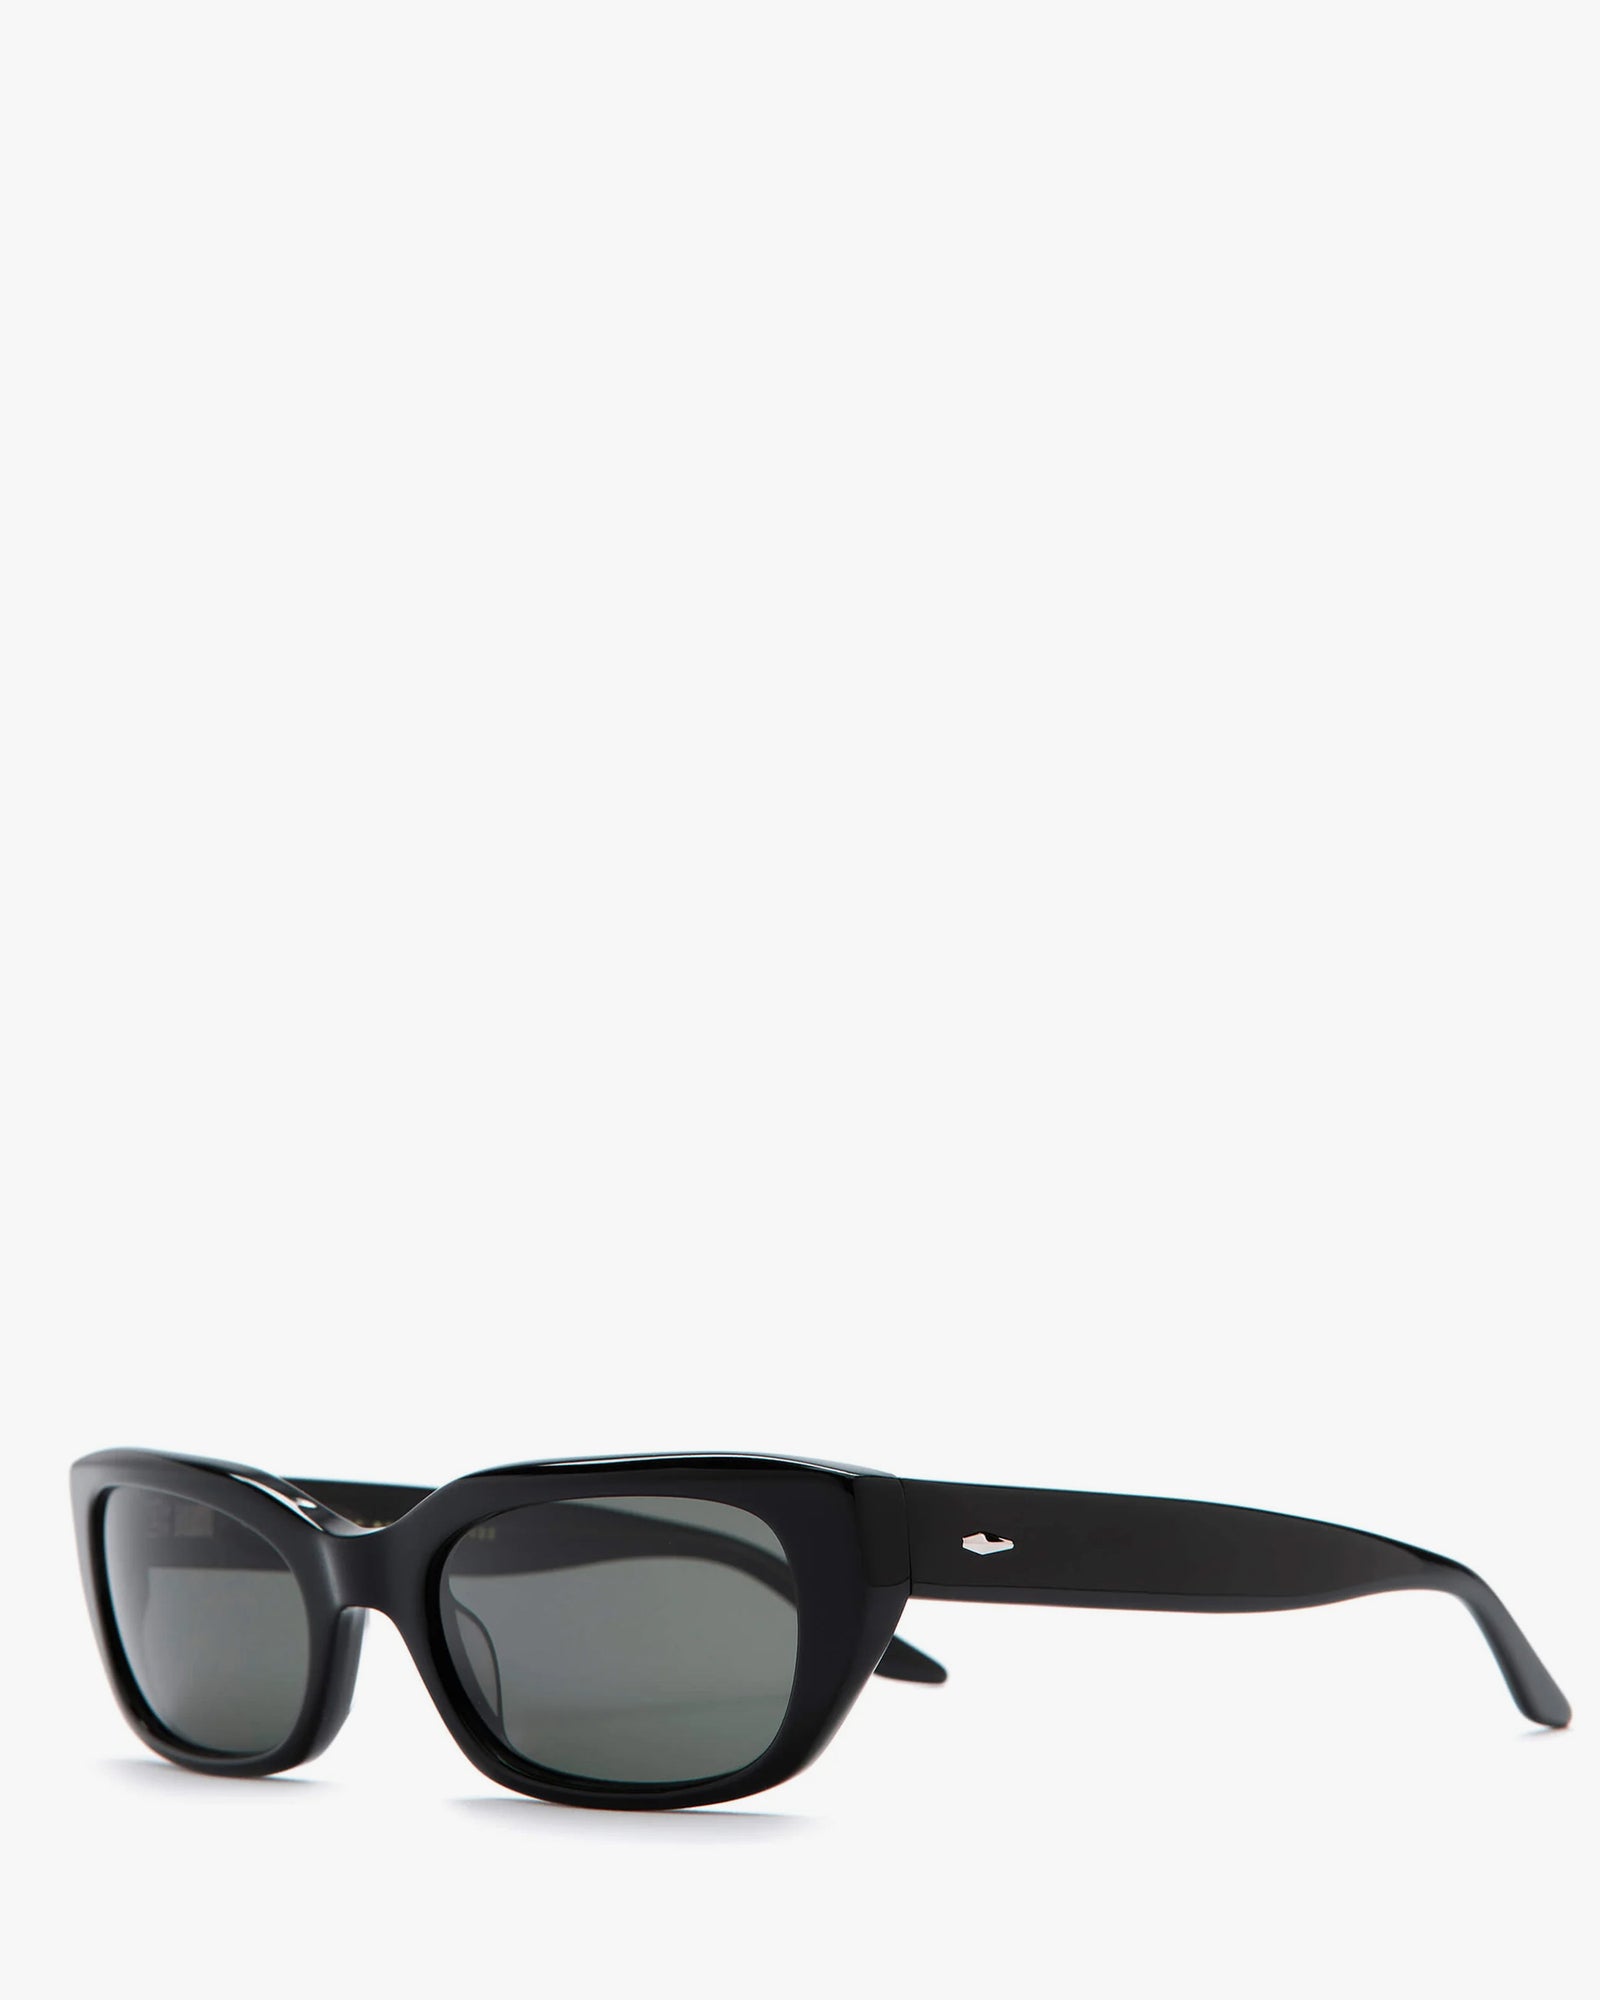 side angled view of the Black Gothic Breeze Sunglasses from CRAP Eyewear